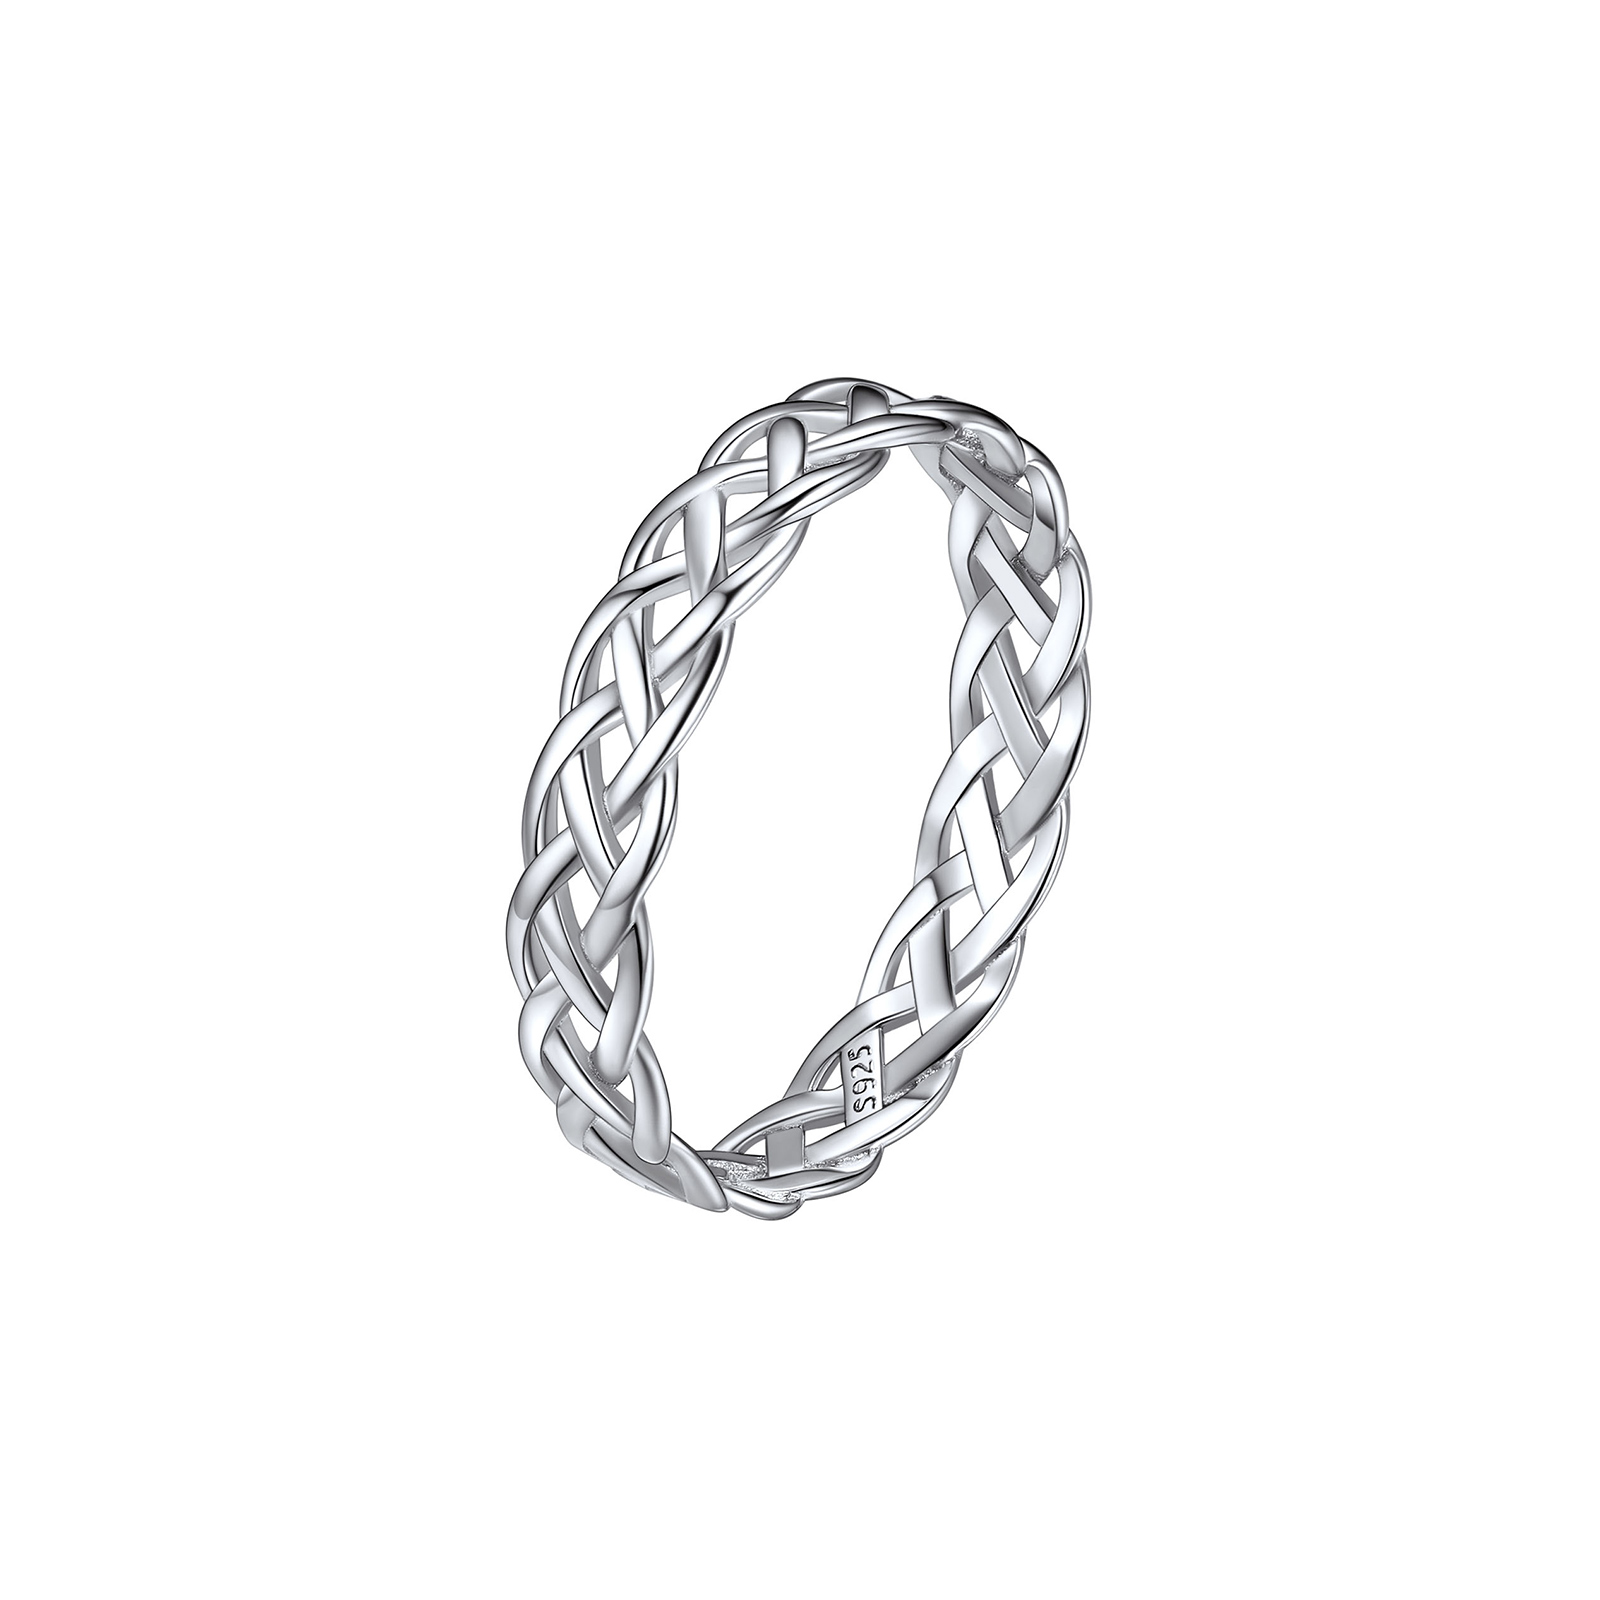 ChicSilver Sterling Silver Celtic Knot Eternity Wedding Band Ring For Women